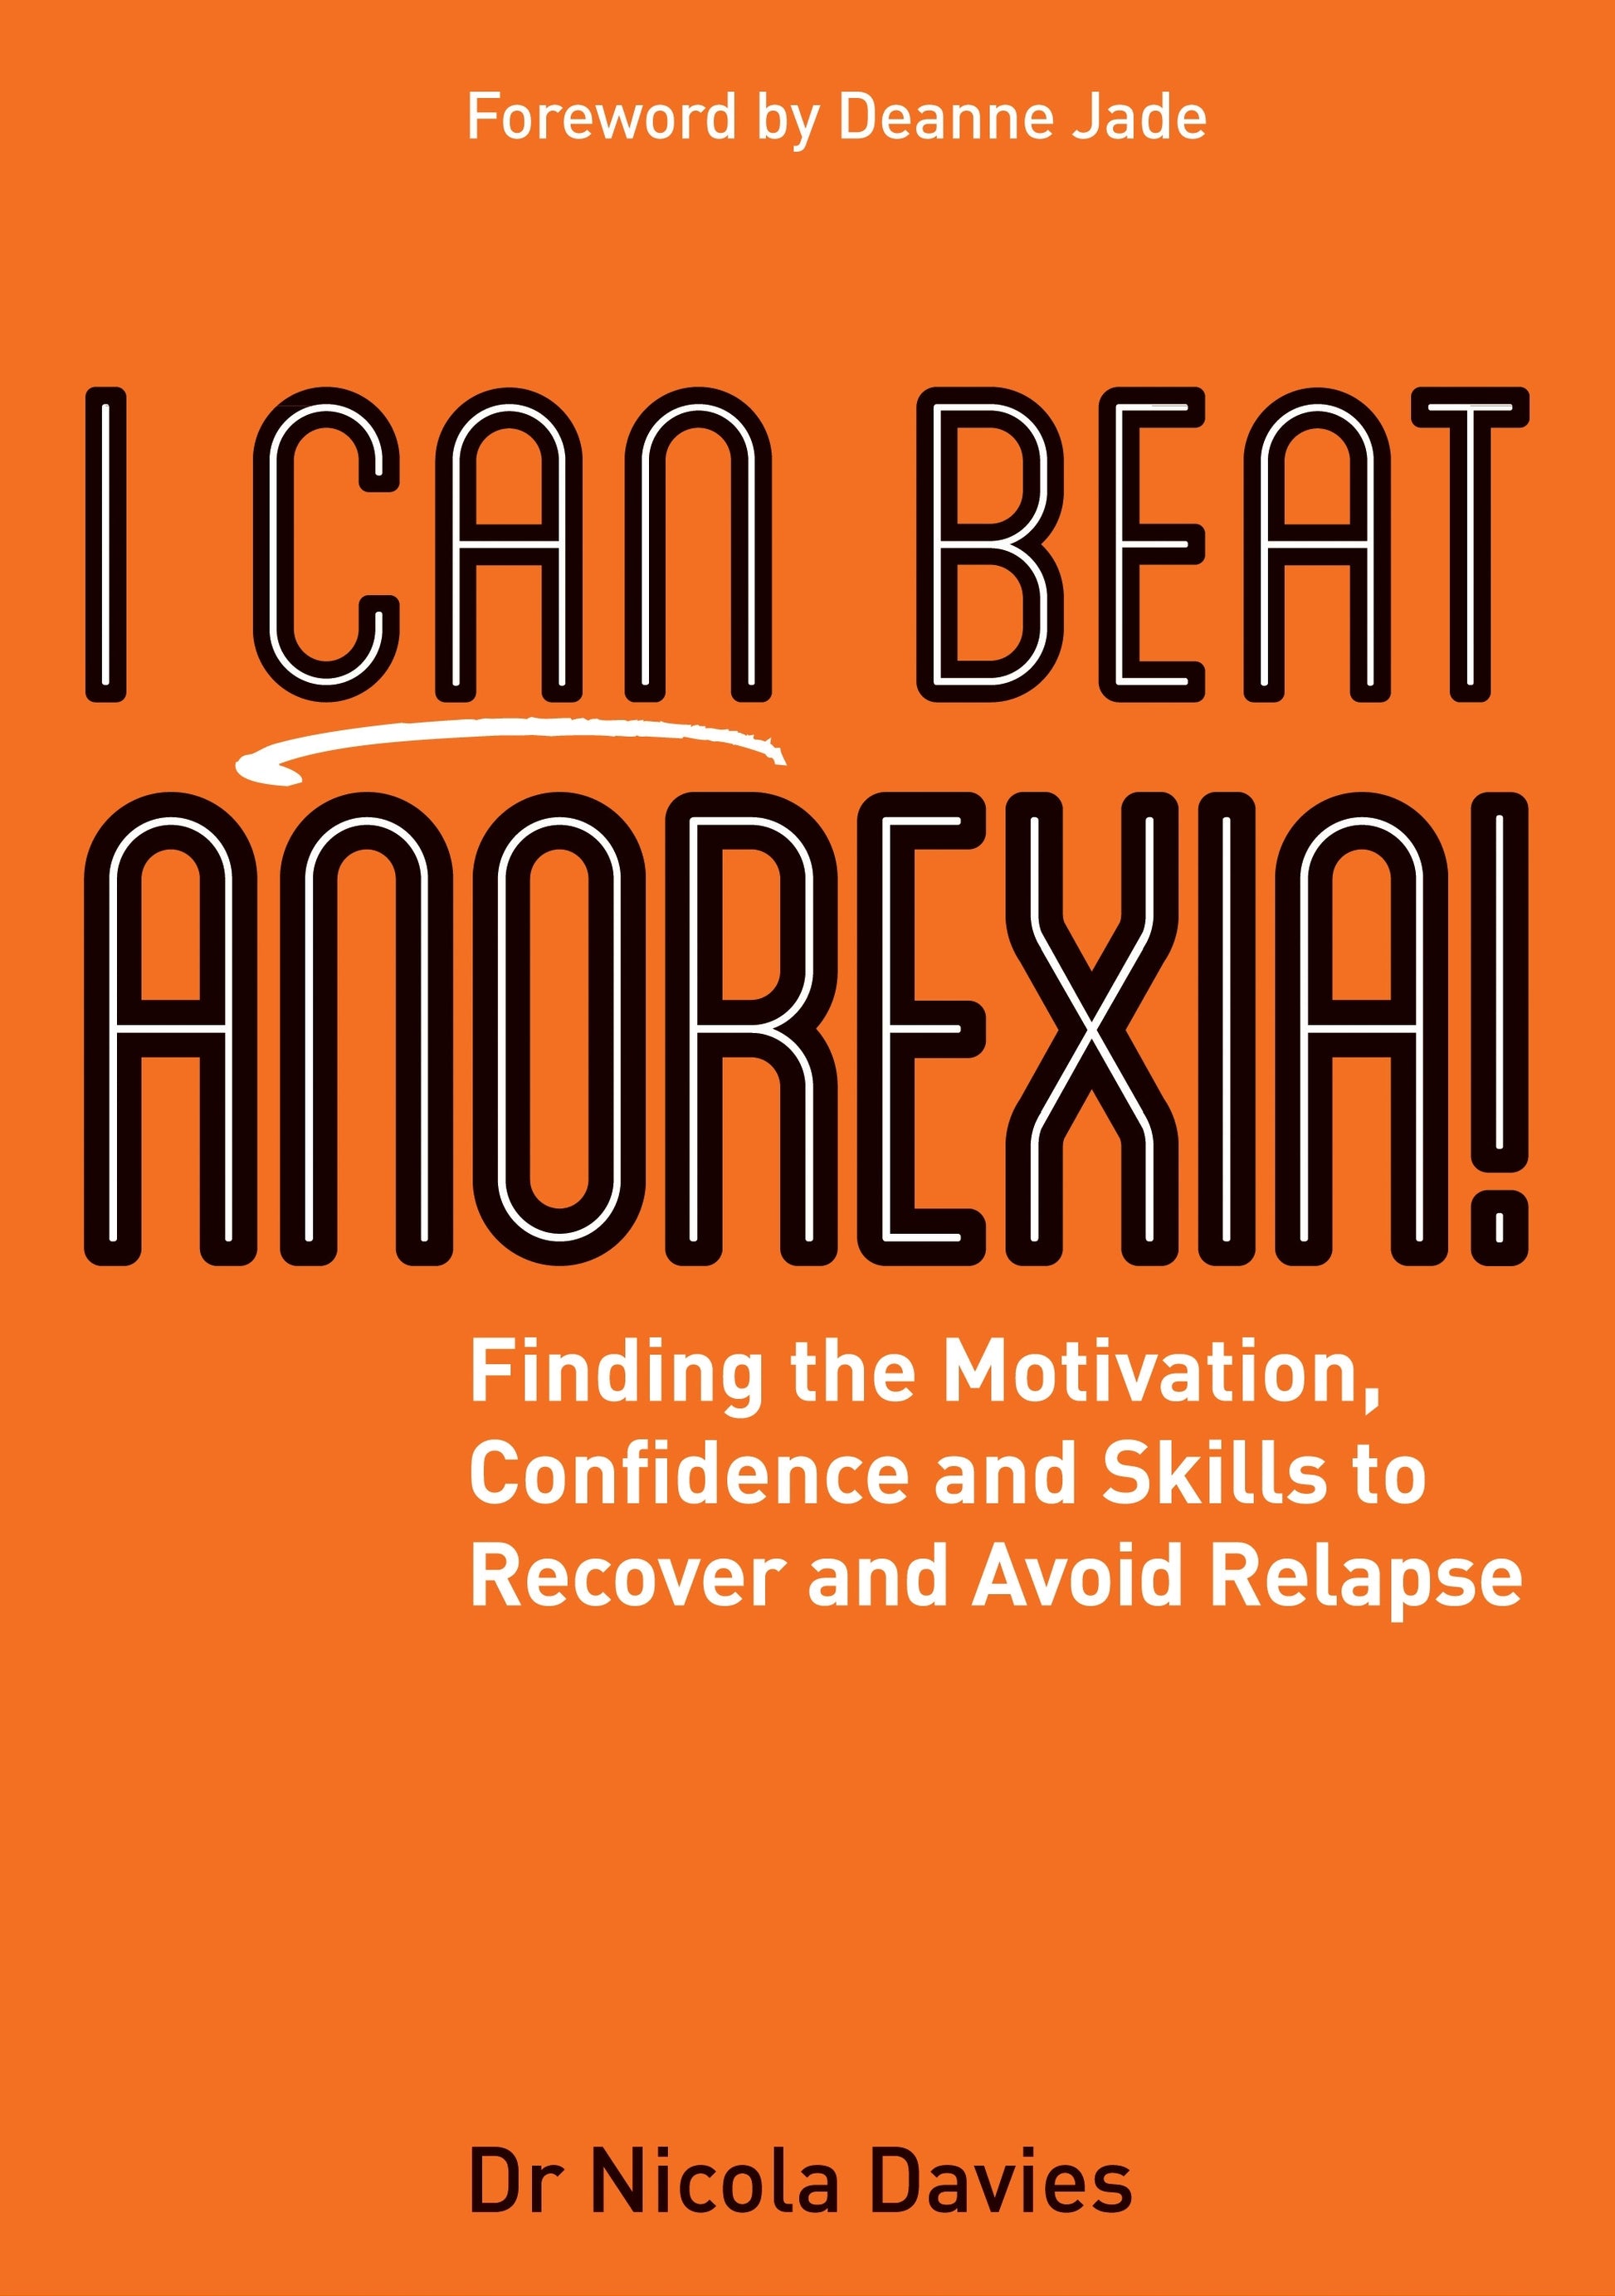 I Can Beat Anorexia! by Nicola Davies